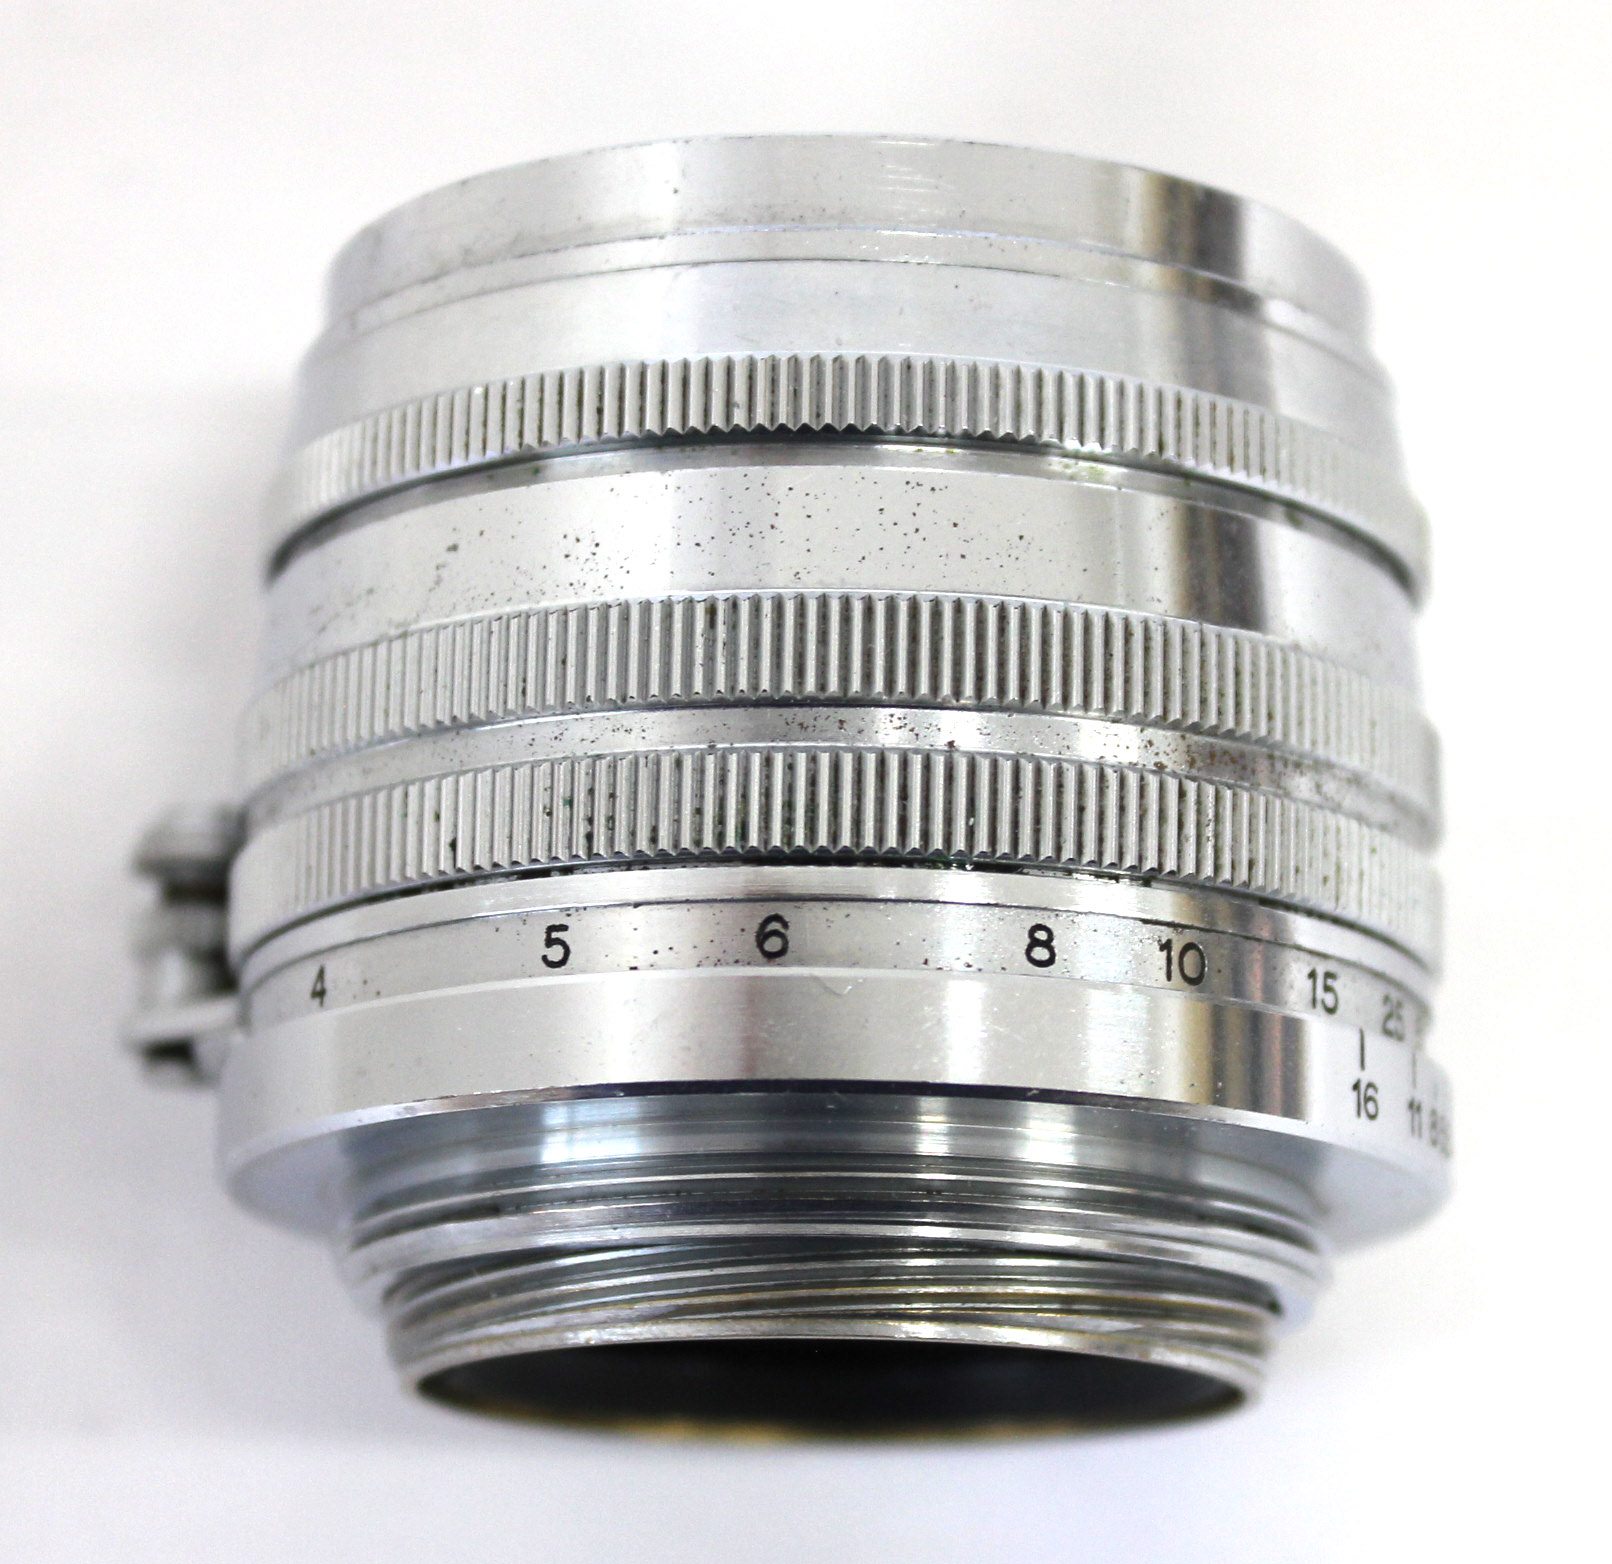  Canon 50mm F/1.8 Lens L39 LTM Leica Screw Mount Silver from Japan  Photo 3